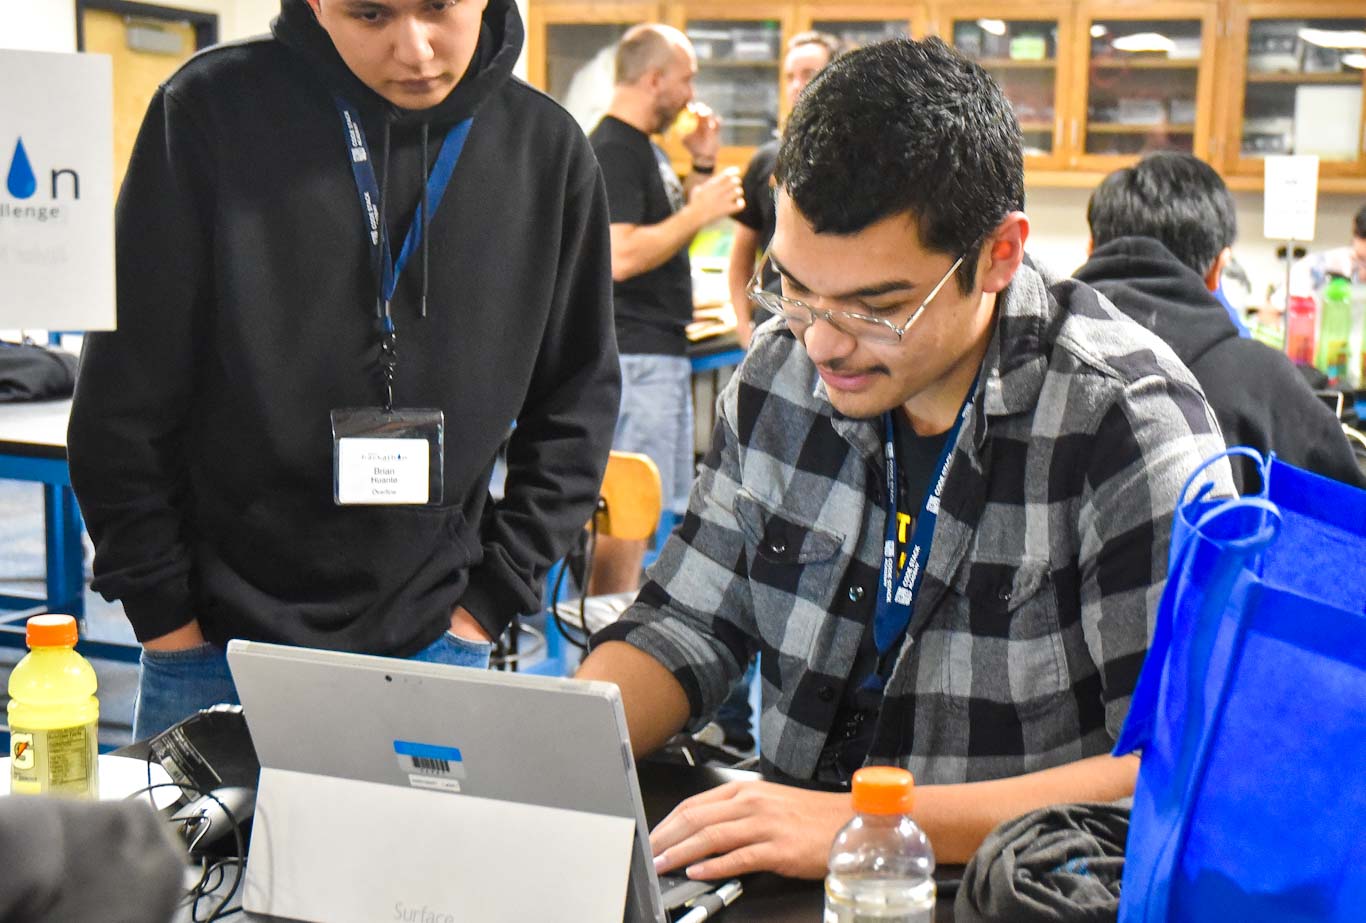 San Joaquin Delta College students participated in the fourth annual H2O Hackathon on March 16.